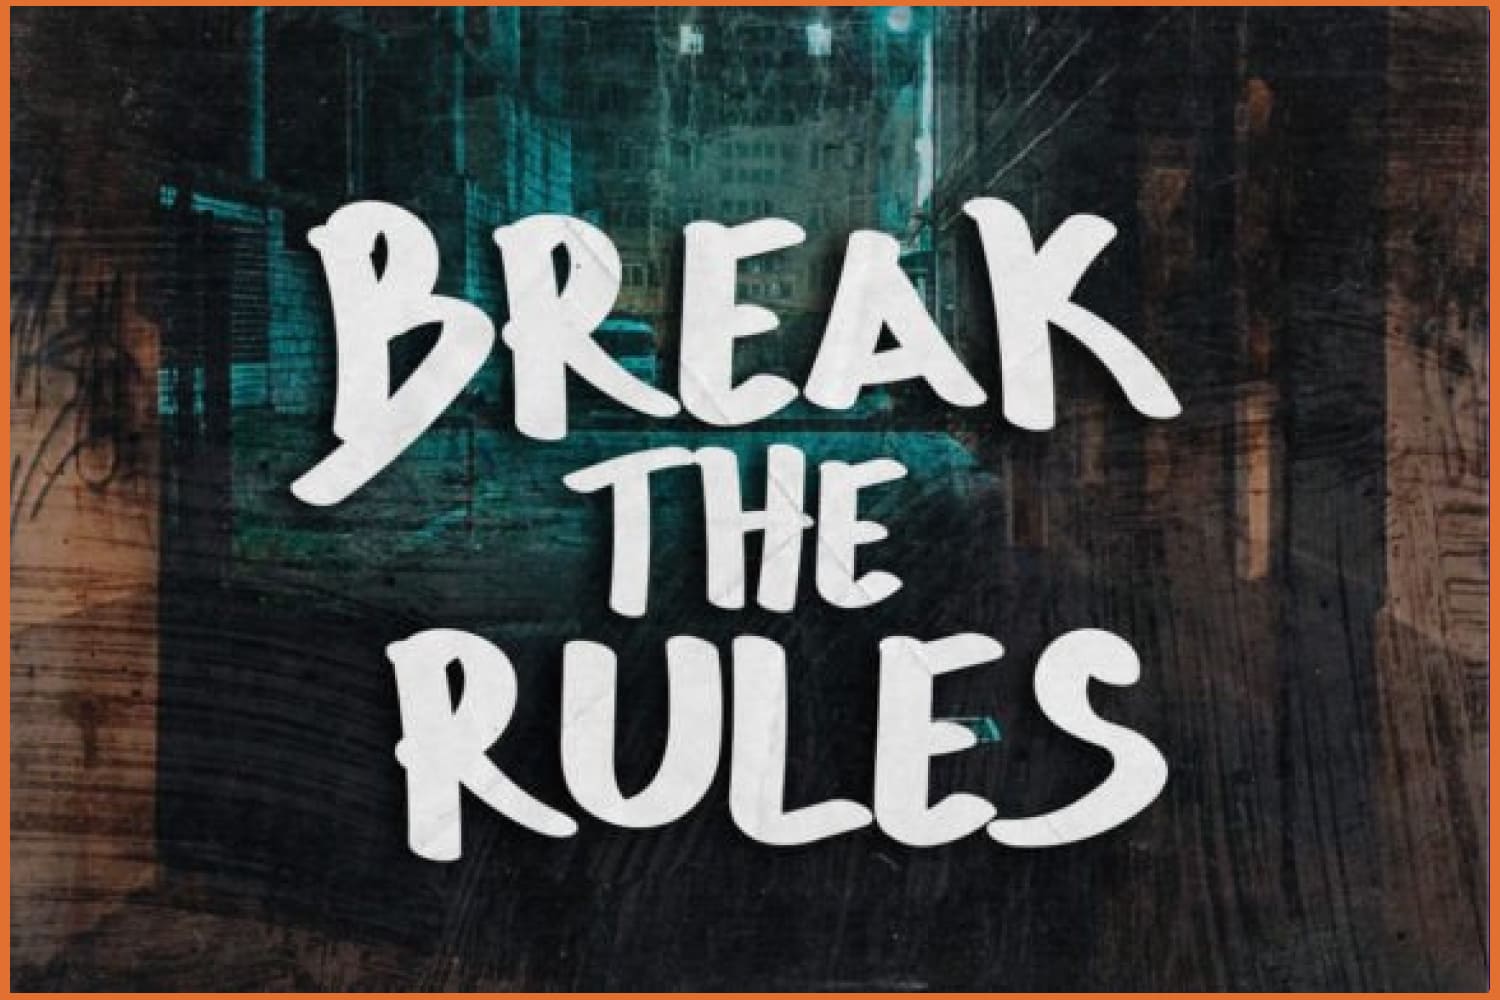 Phrase Brake the rules written in a unique and modern graffiti style.